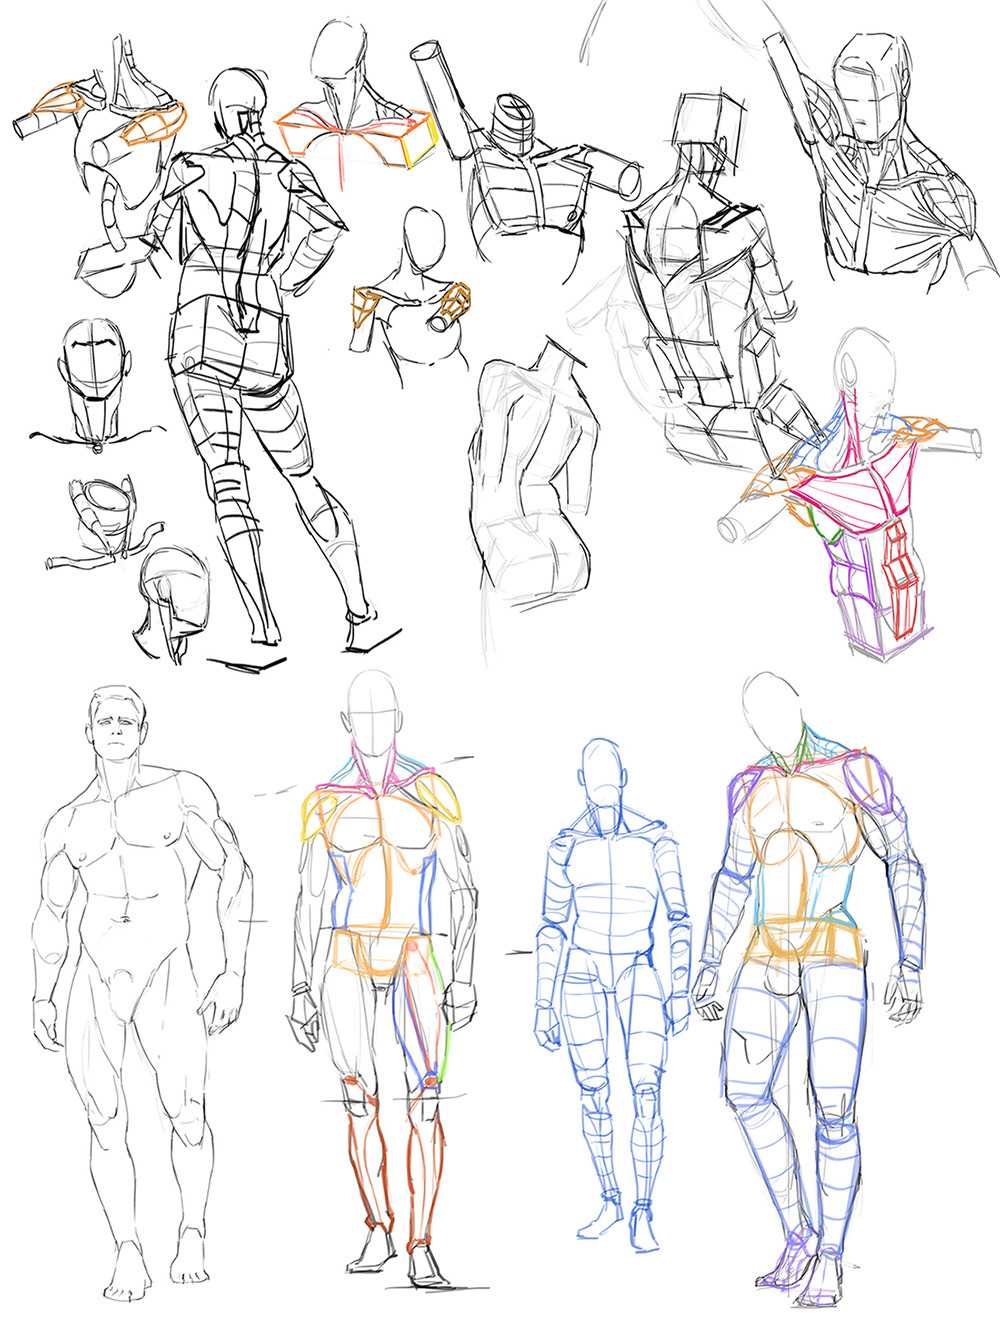 Kasia Art - Practice sheet. Anatomy and heads. Some are...